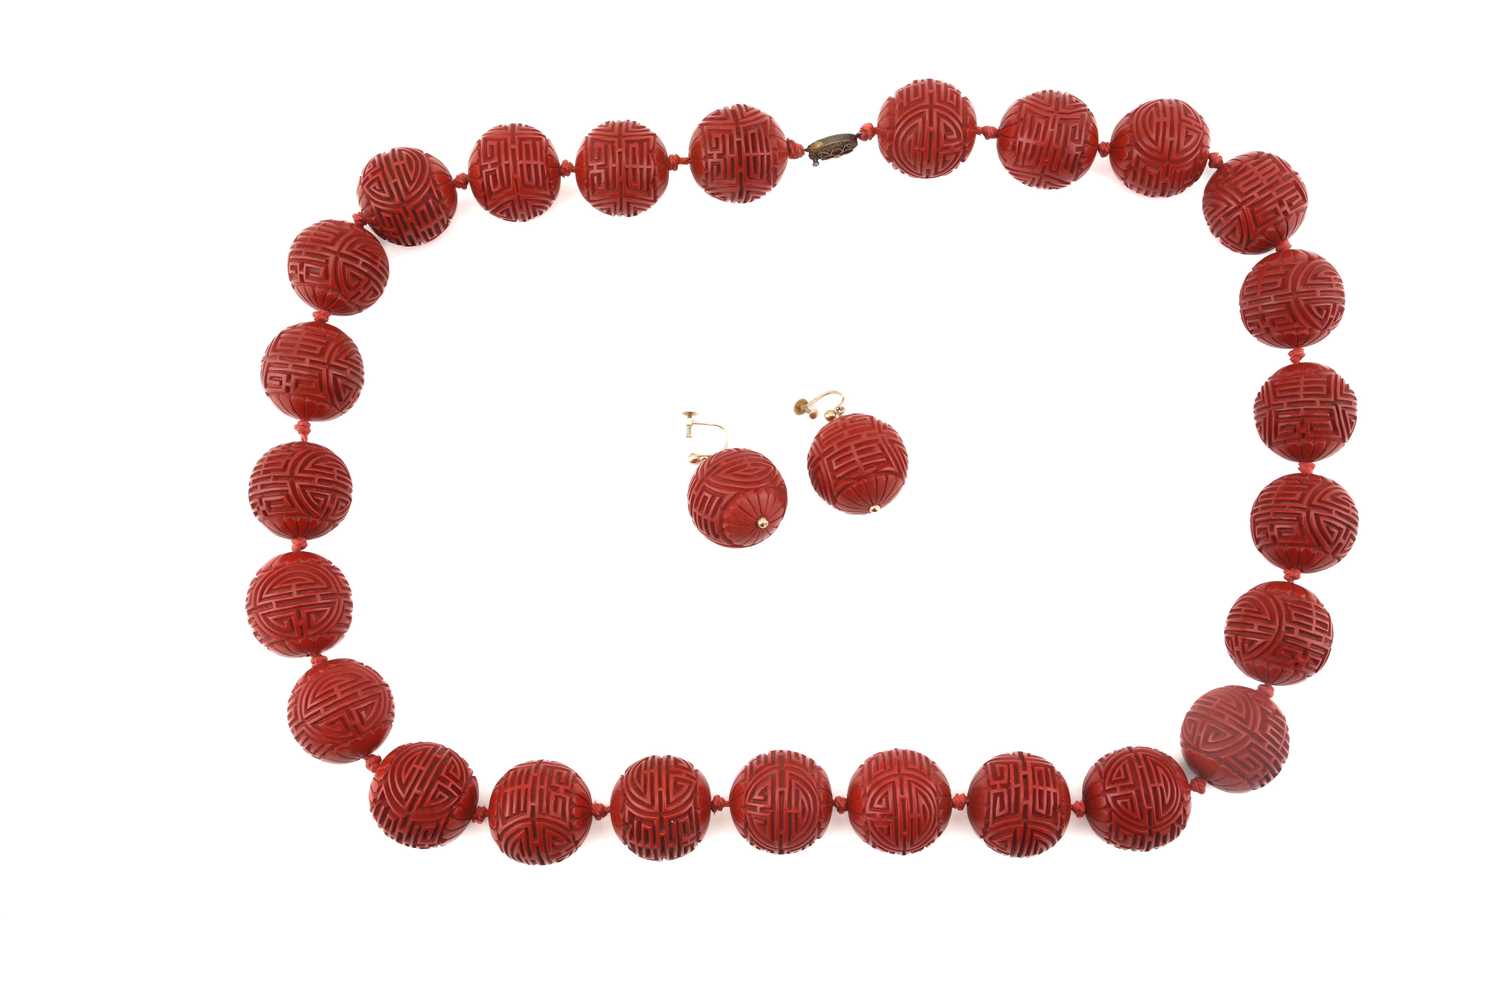 A Chinese lacquer carved bead necklace and matching earrings; the necklace consists of twenty-five